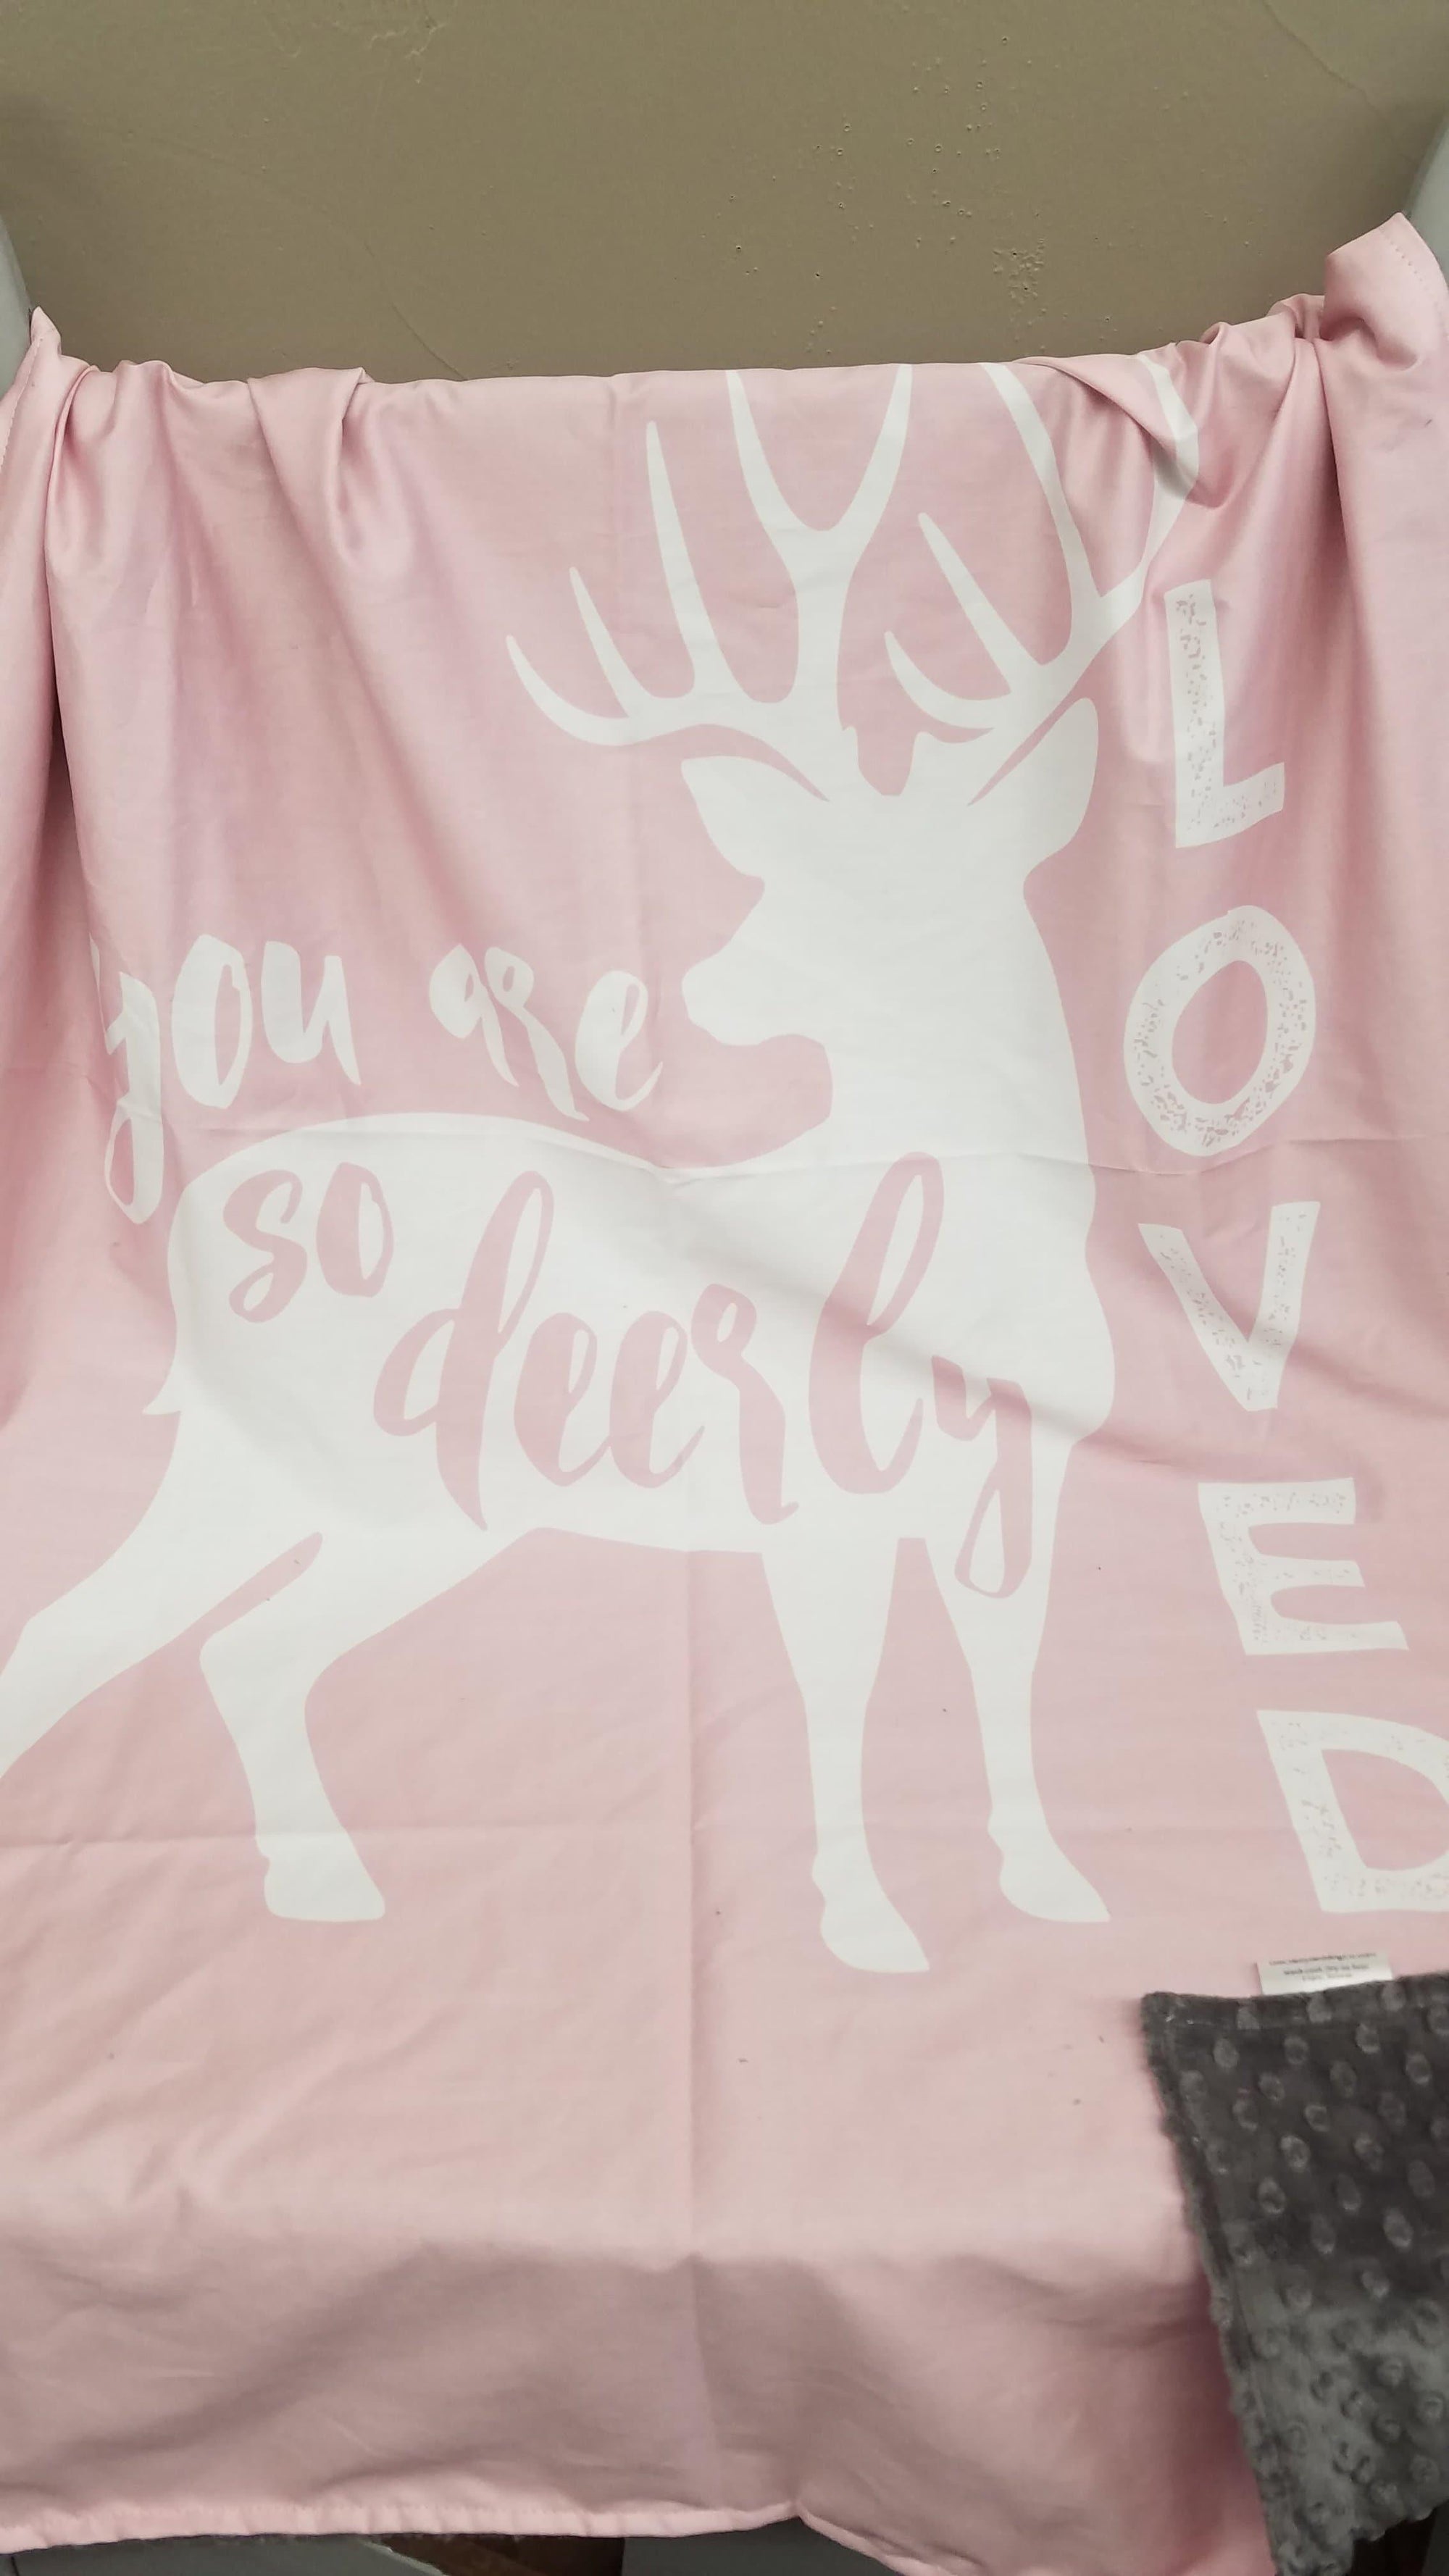 Standard Blanket - You Are So Deerly Loved  Deer and Minky Woodland Blanket - DBC Baby Bedding Co 